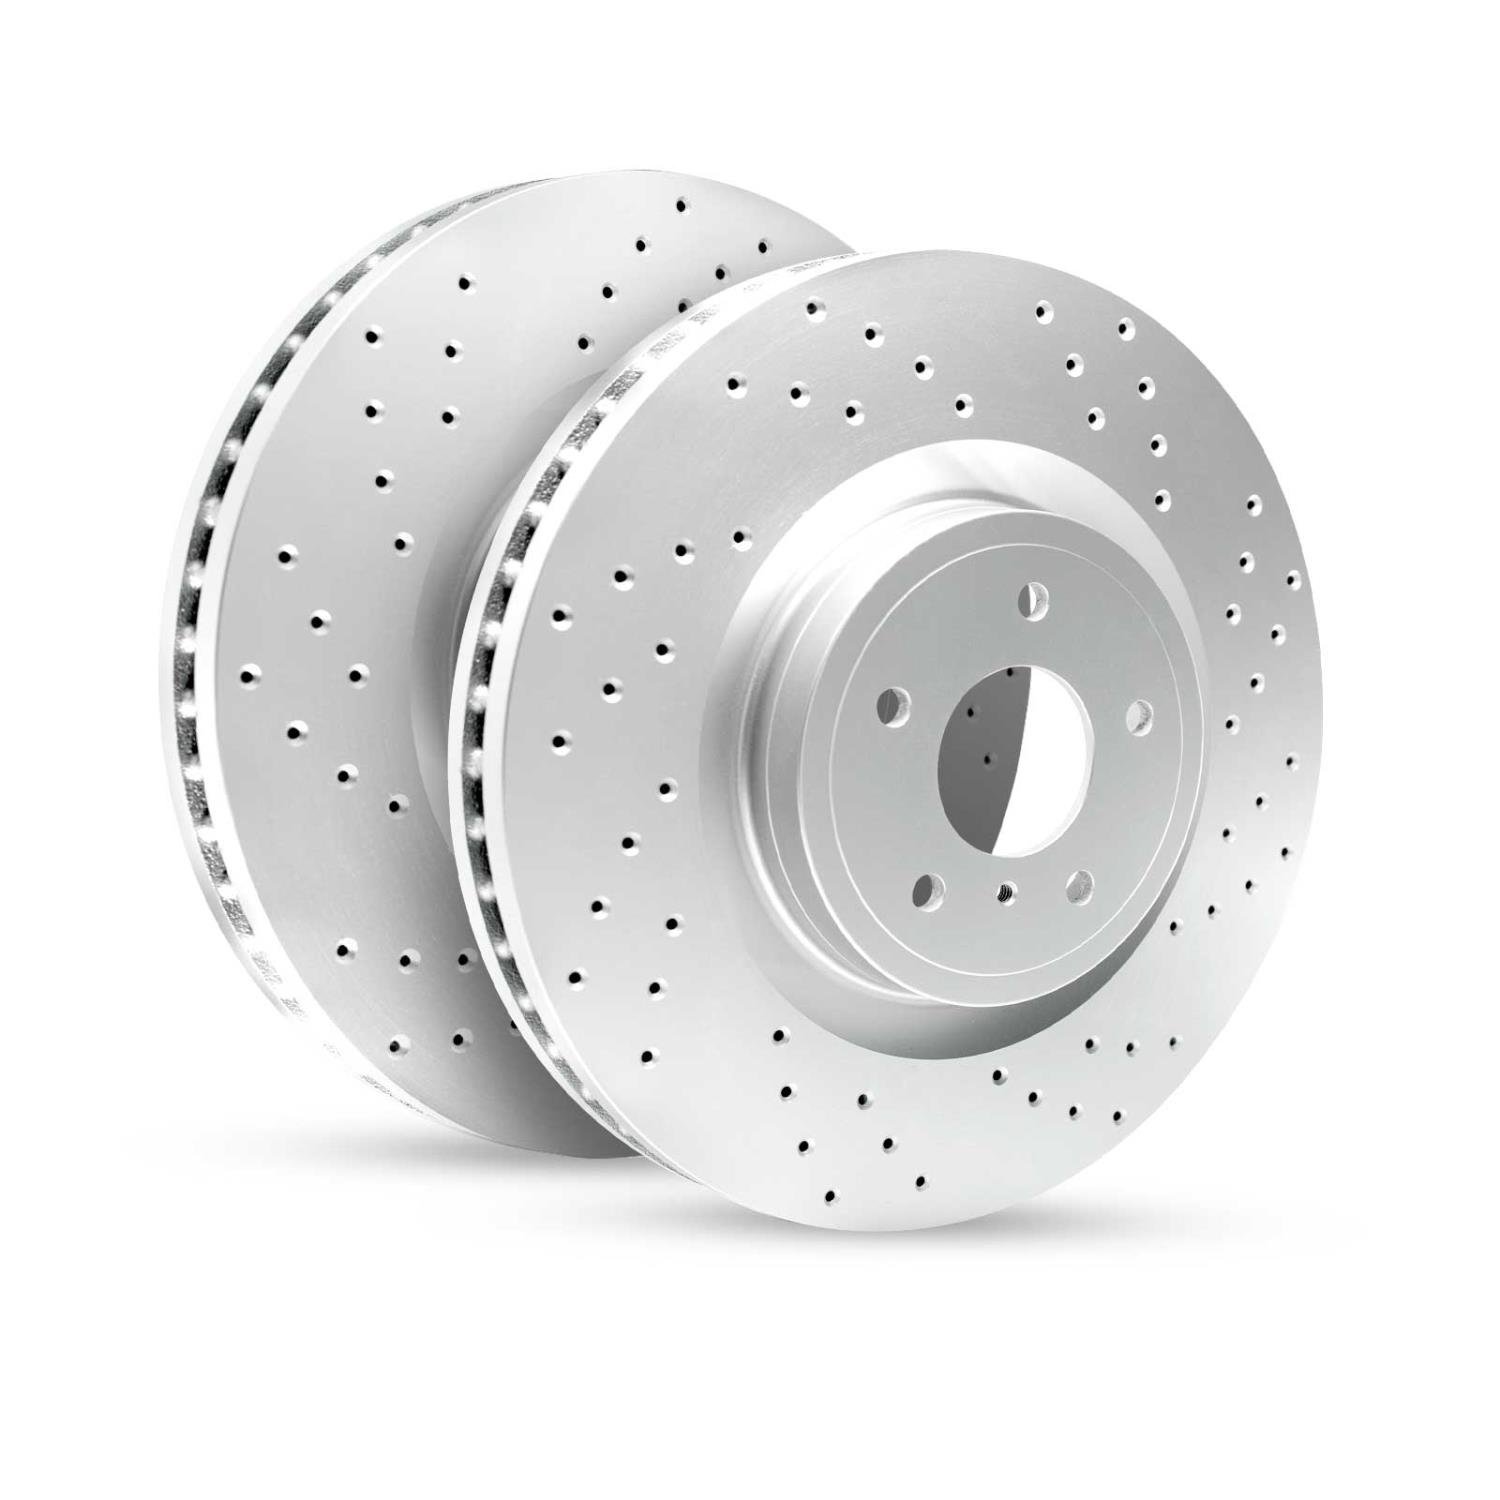 GEO-Carbon Drilled/Slotted Rotors, 2000-2006 Fits Multiple